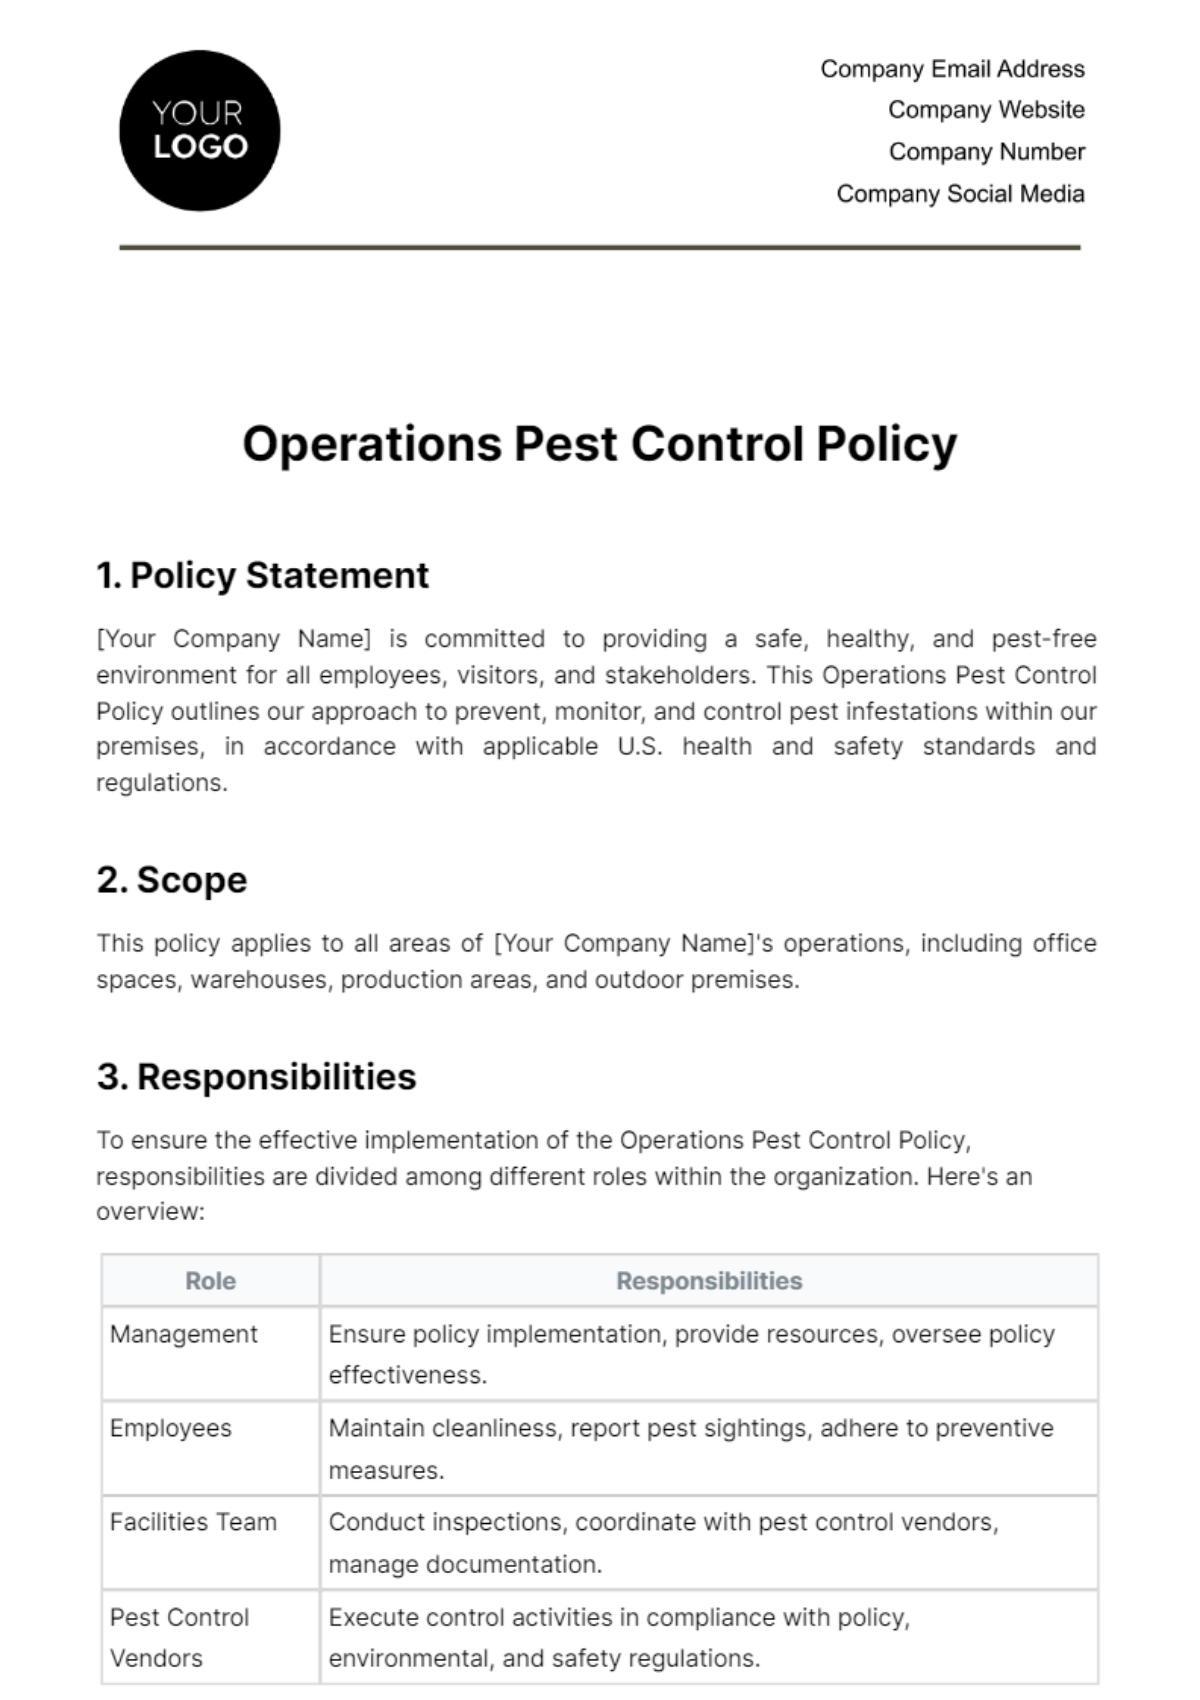 Free Operations Pest Control Policy Template